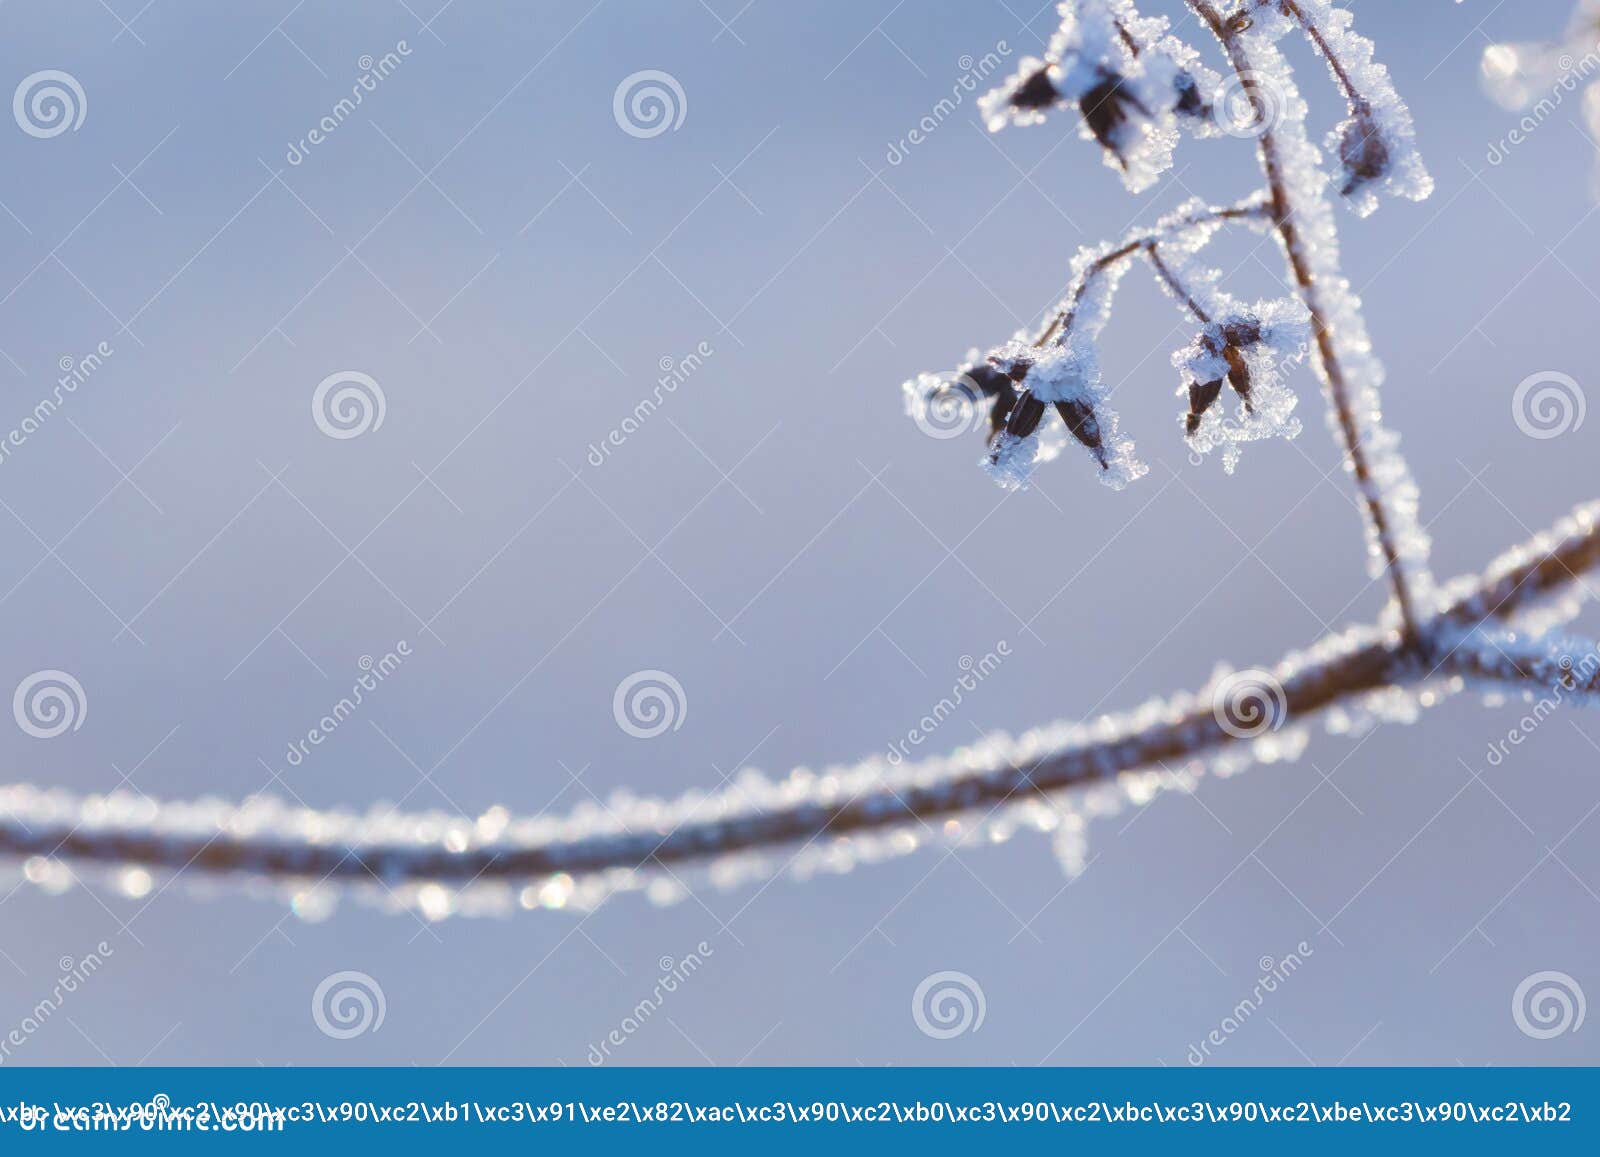 beautiful winter background with the frozen flowers and plants. a natural pattern on plants